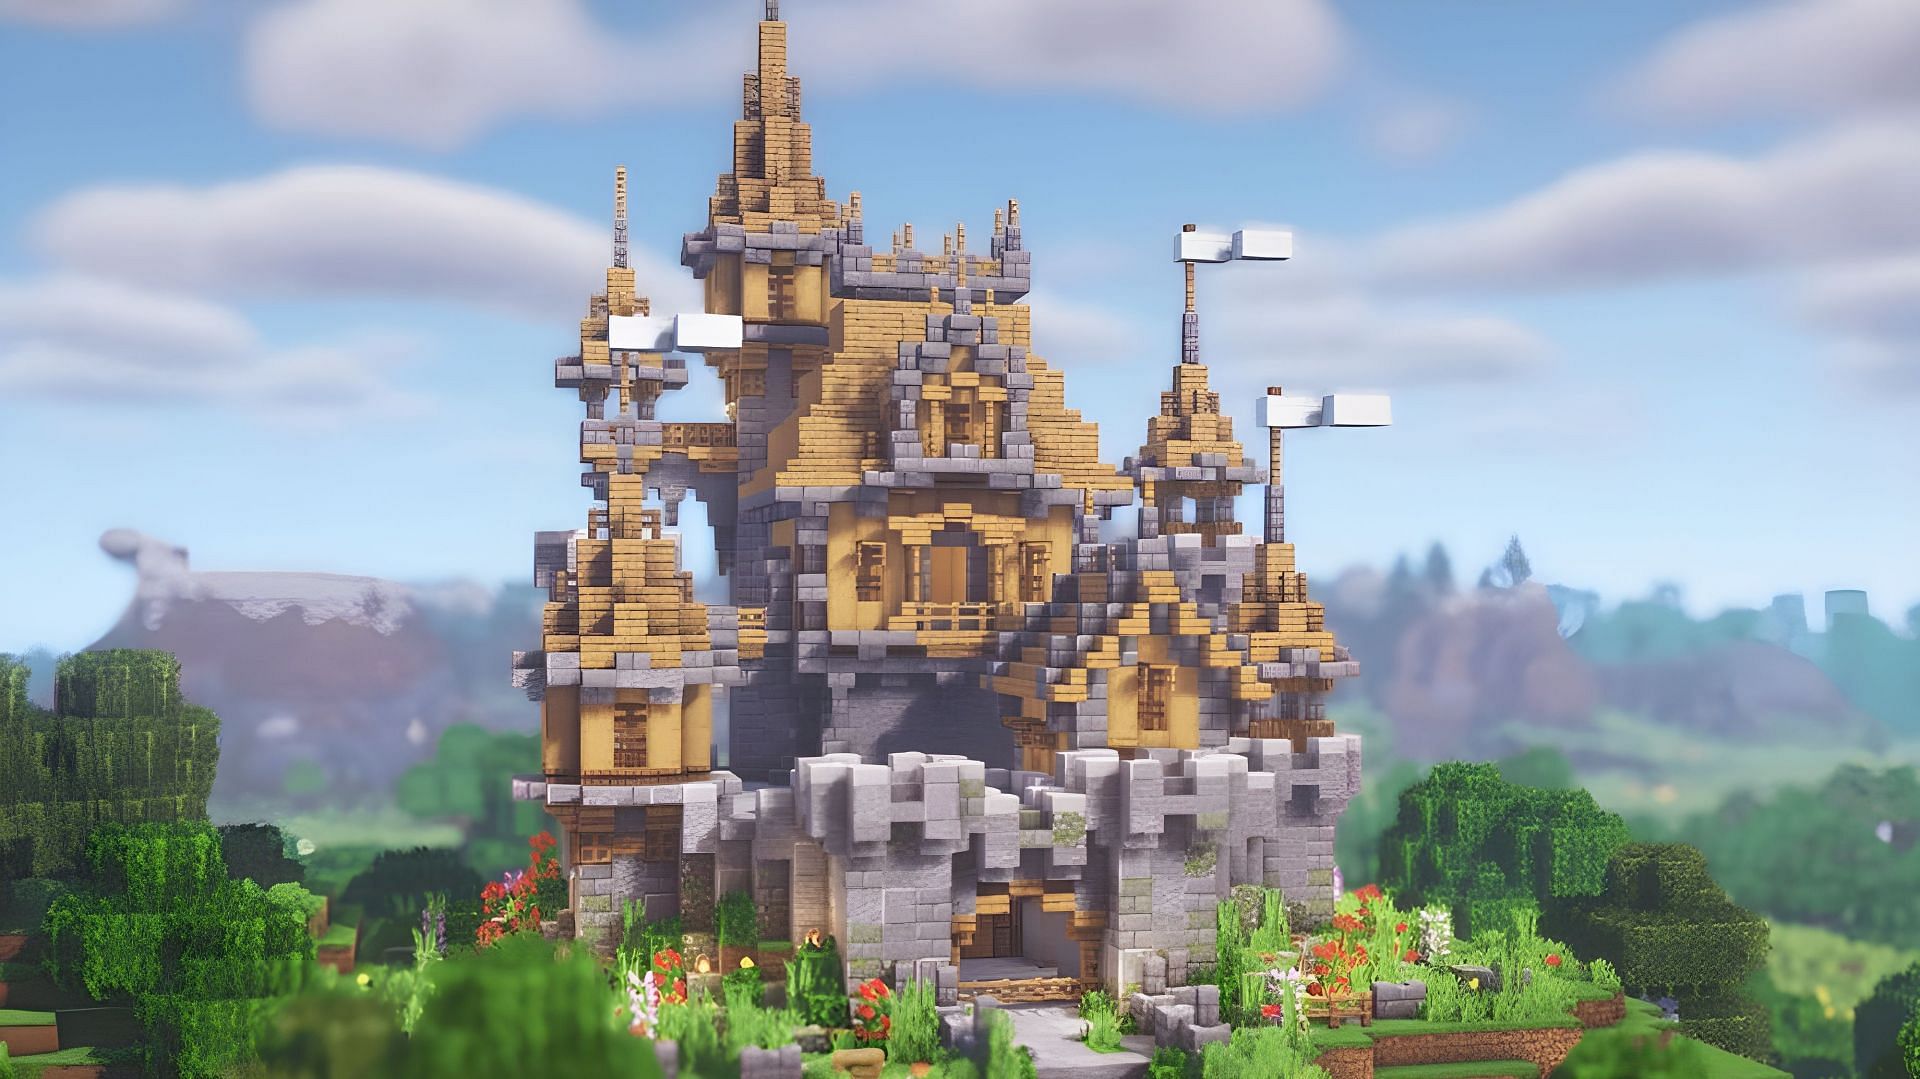 Castles are some of the coolest structures to build in Minecraft (Image via Youtube/Minecraft Fantasy Builds)